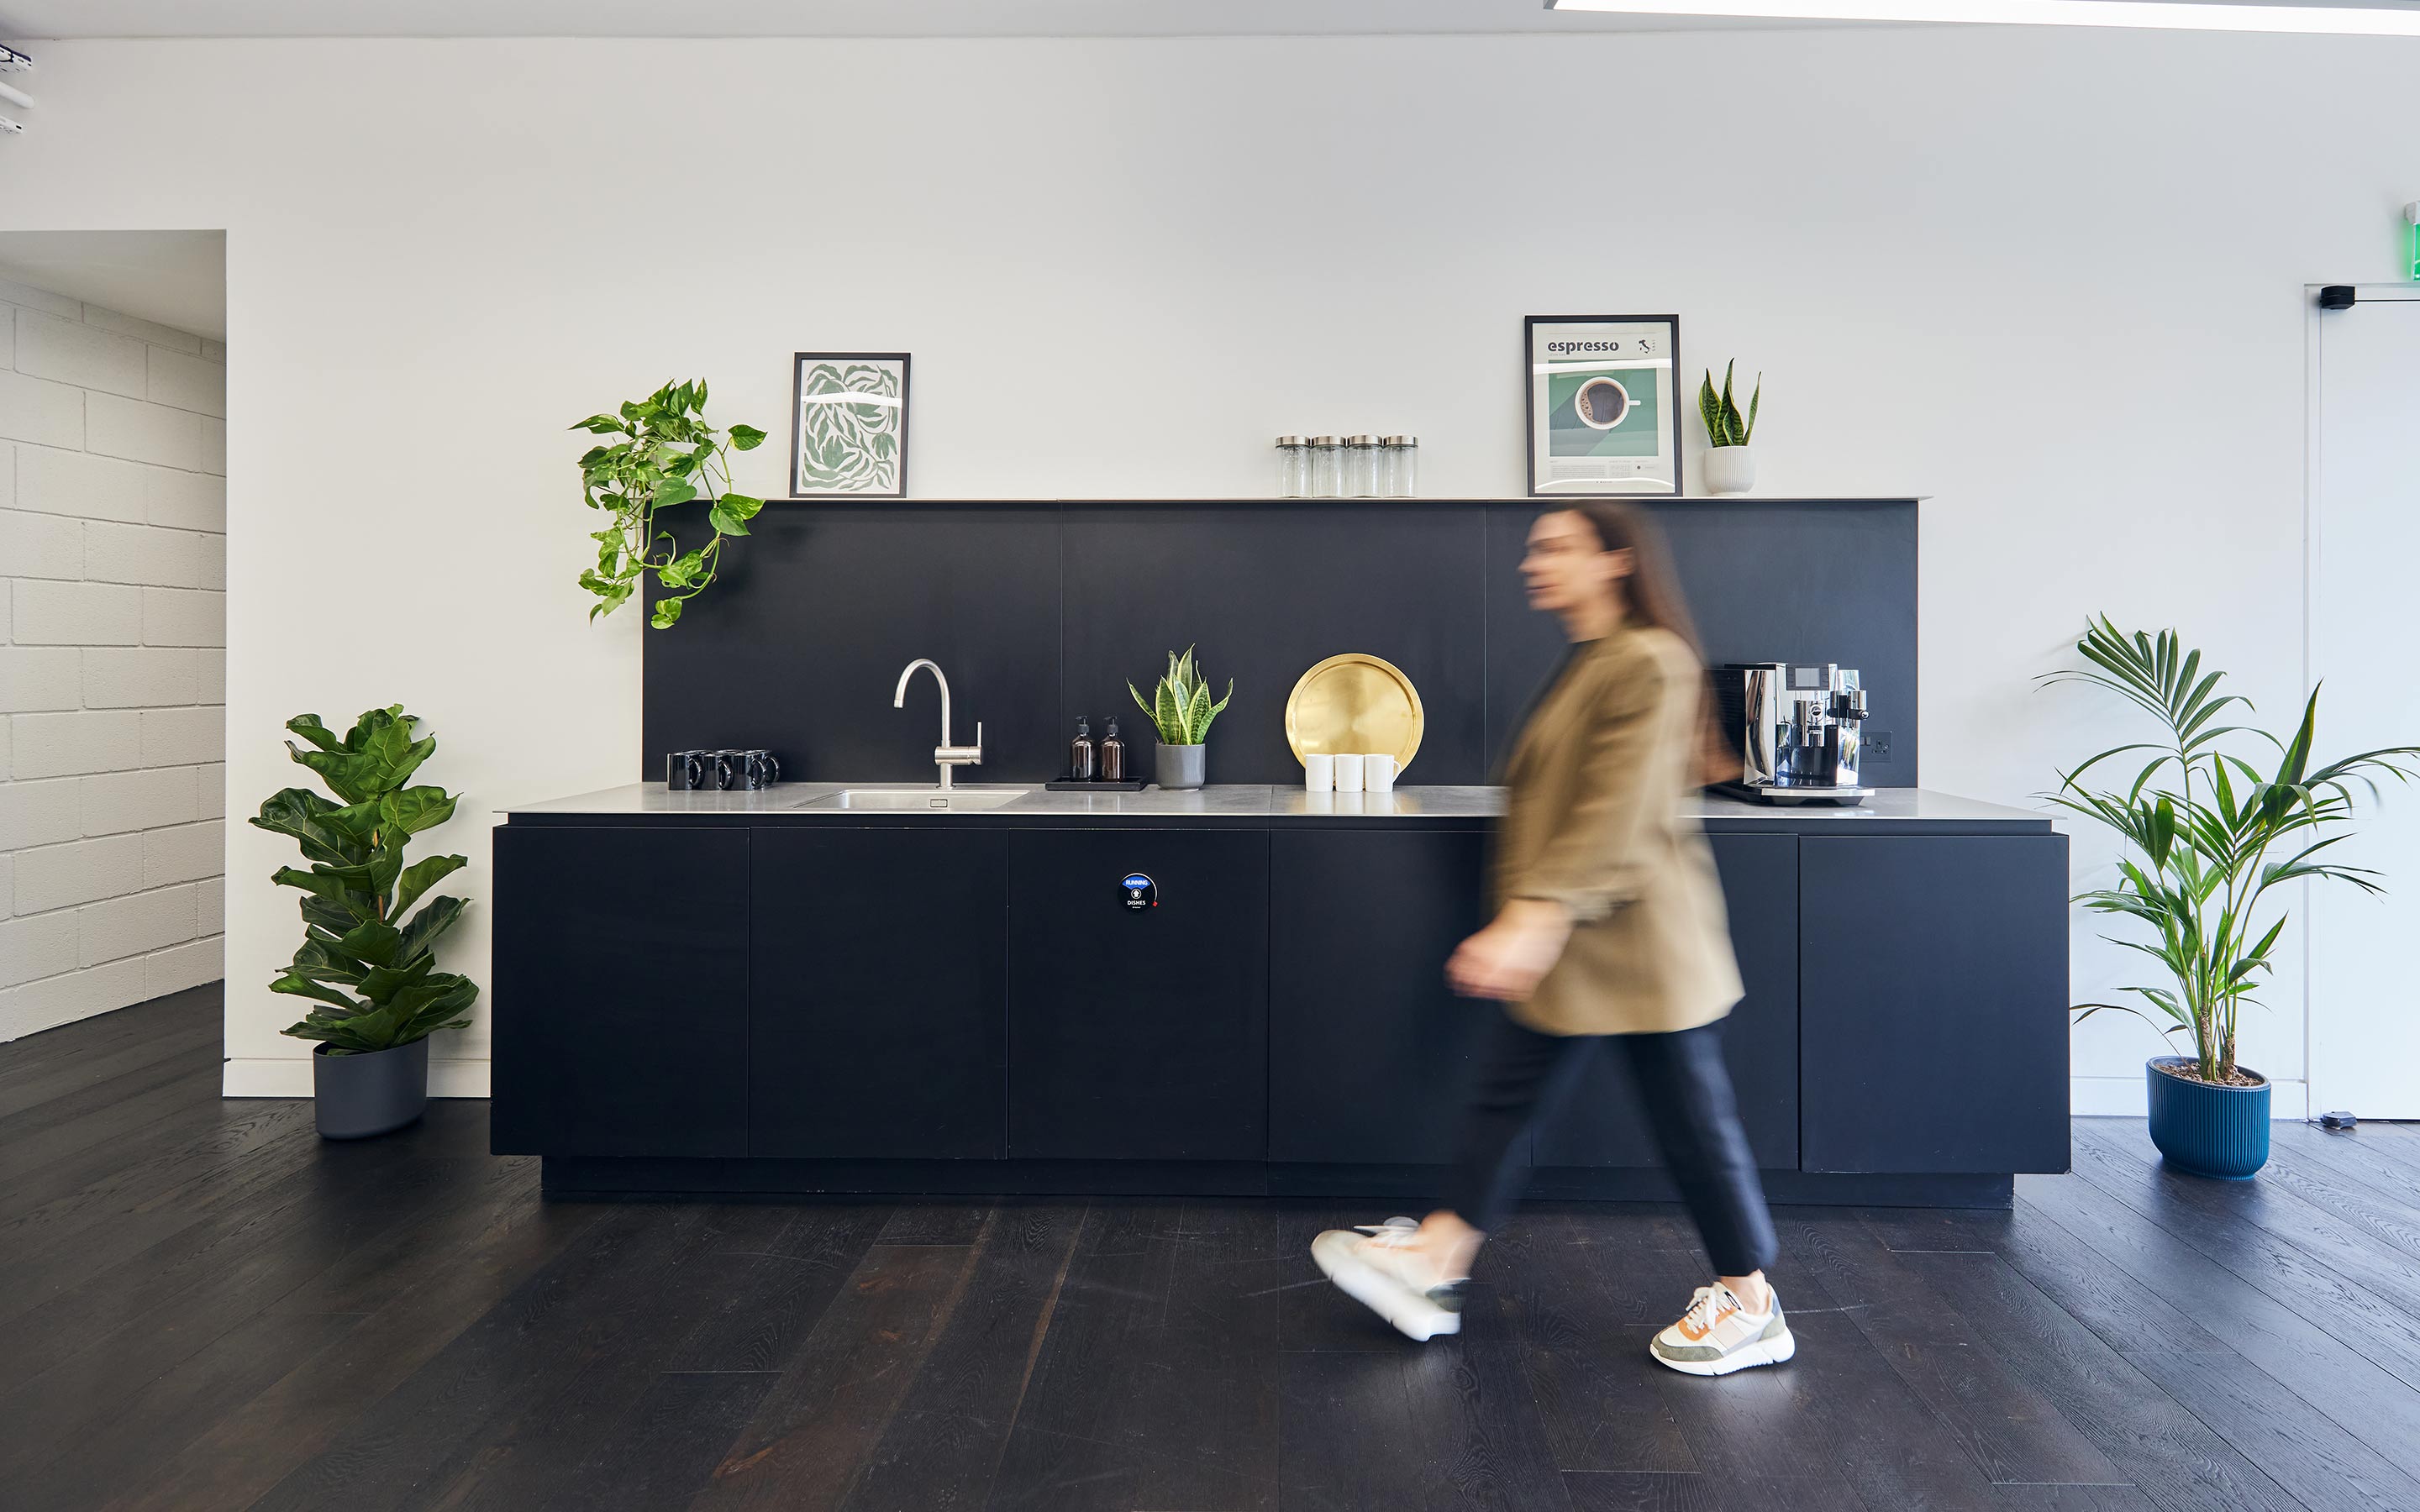 The image shows an employee walking through an office tea point. The space is complete with dark wooden flooring, black kitchen cabinets, and details such as plants and gold serving trays